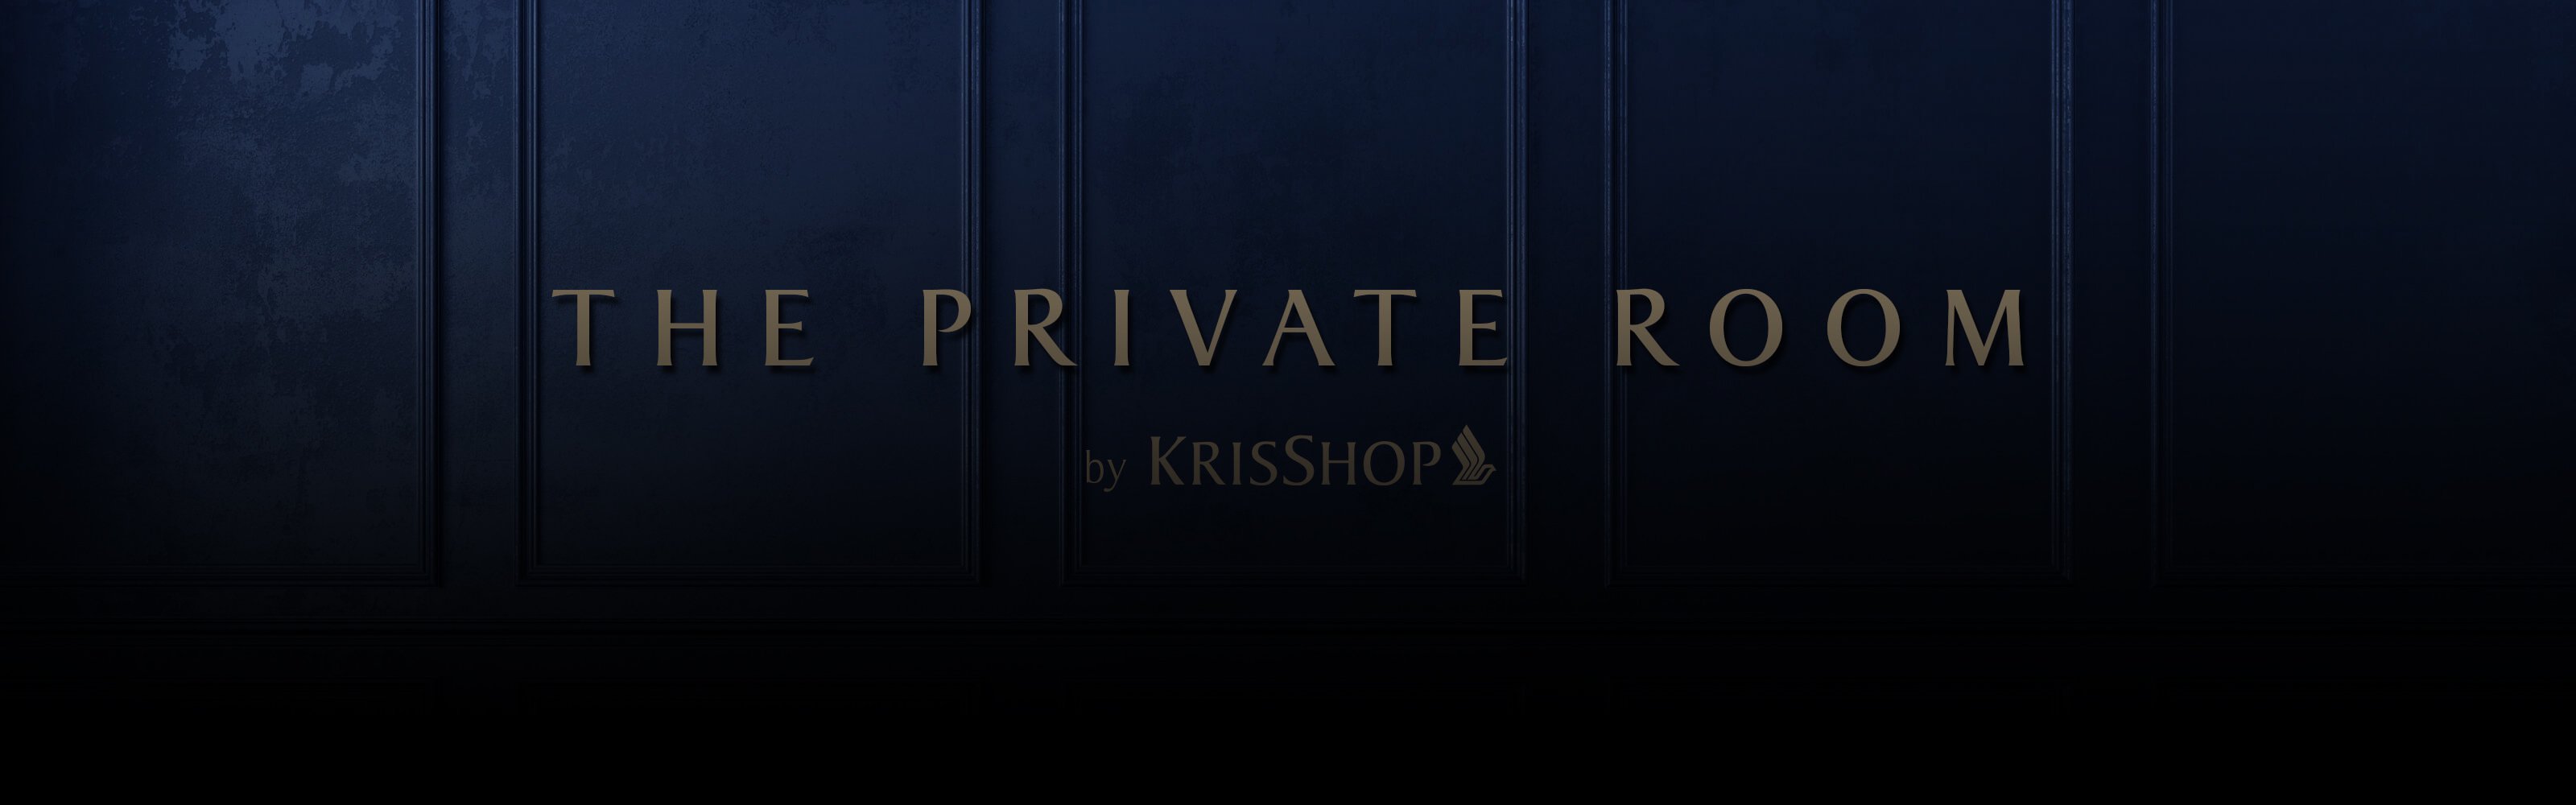 Welcome to The Private Room @ KrisShop.com